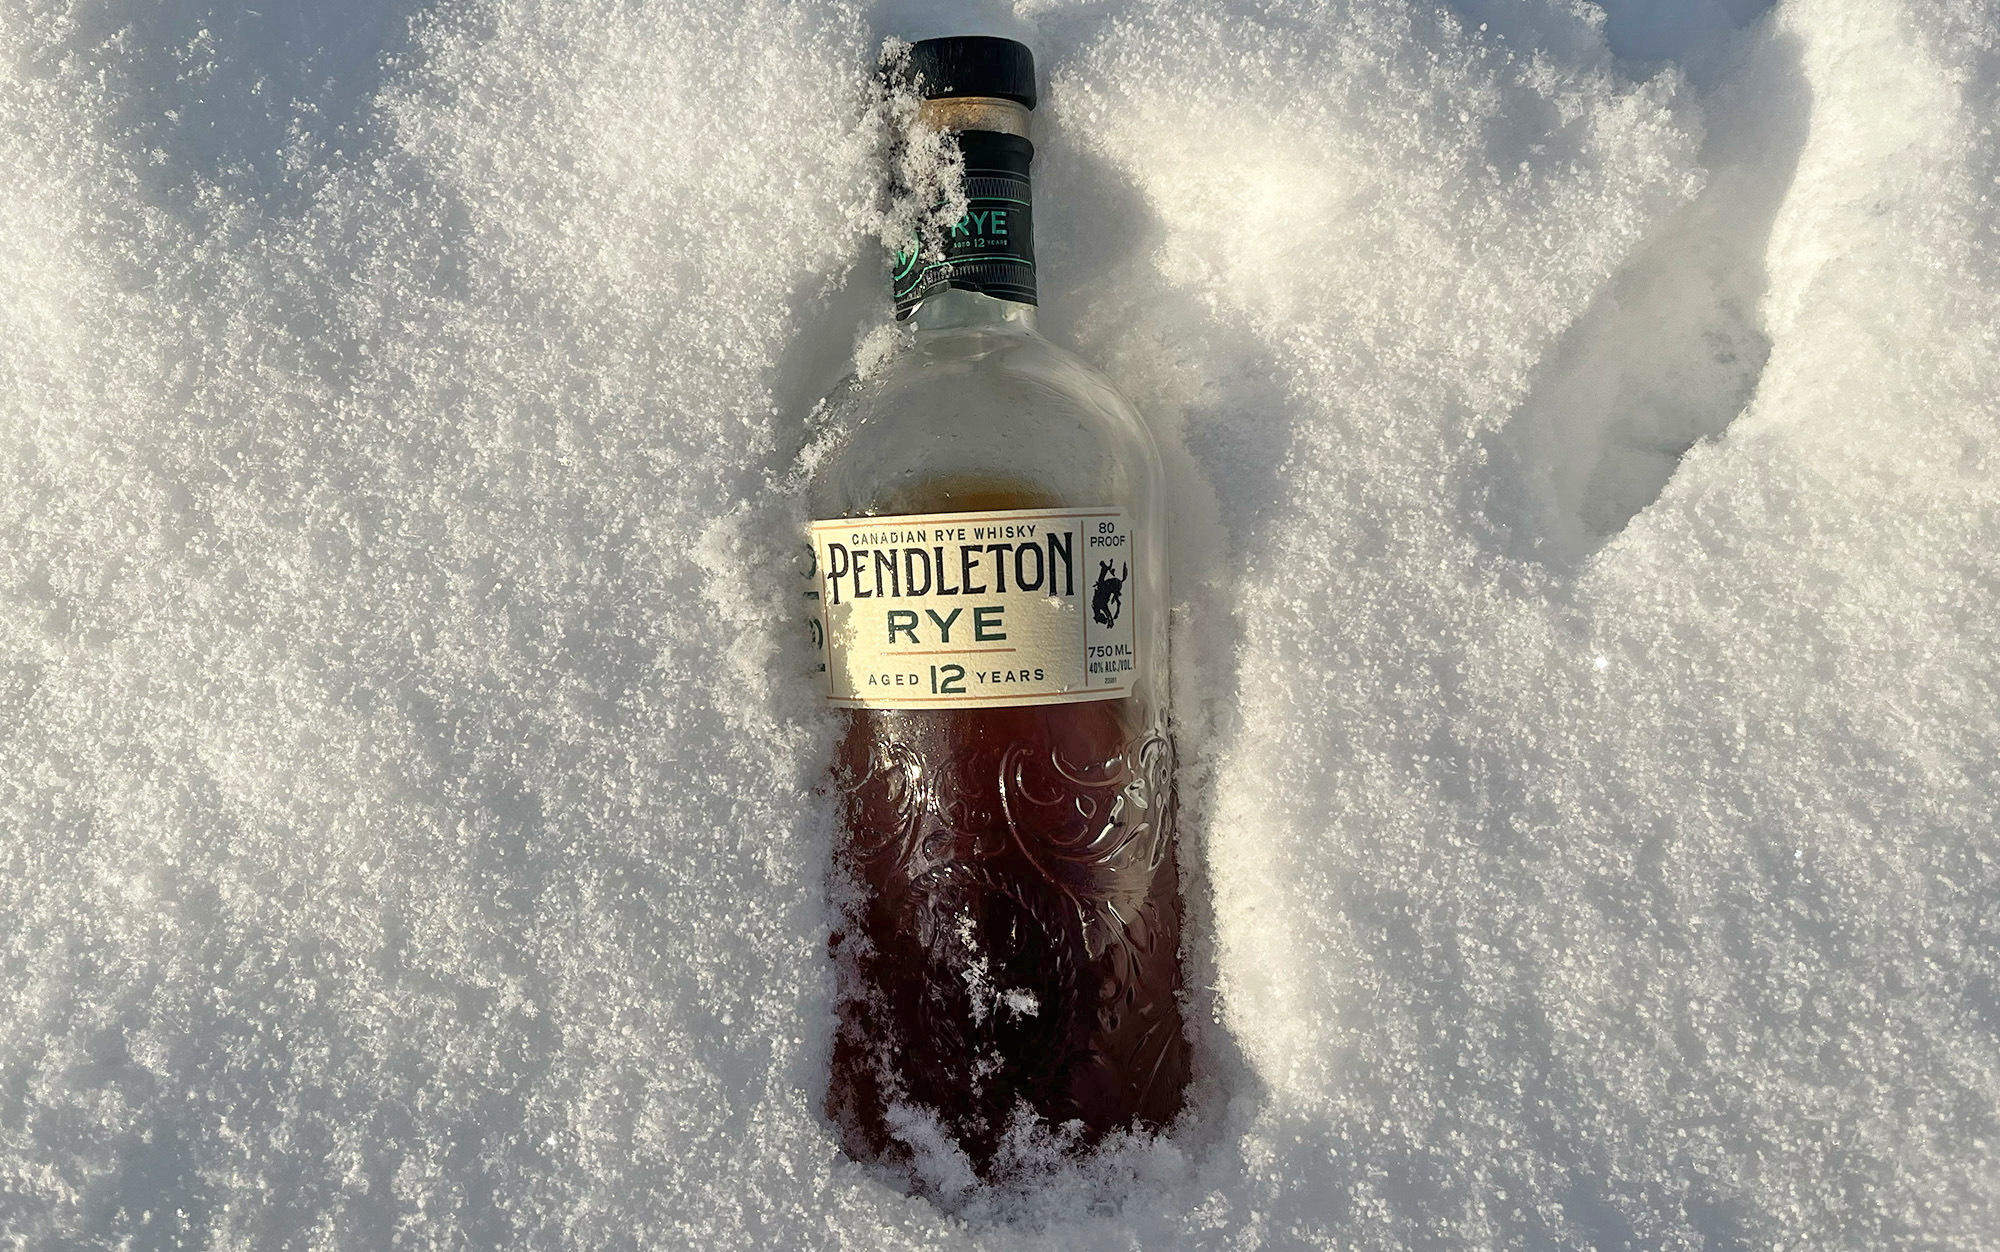 The Pendleton Rye is best for campfires.